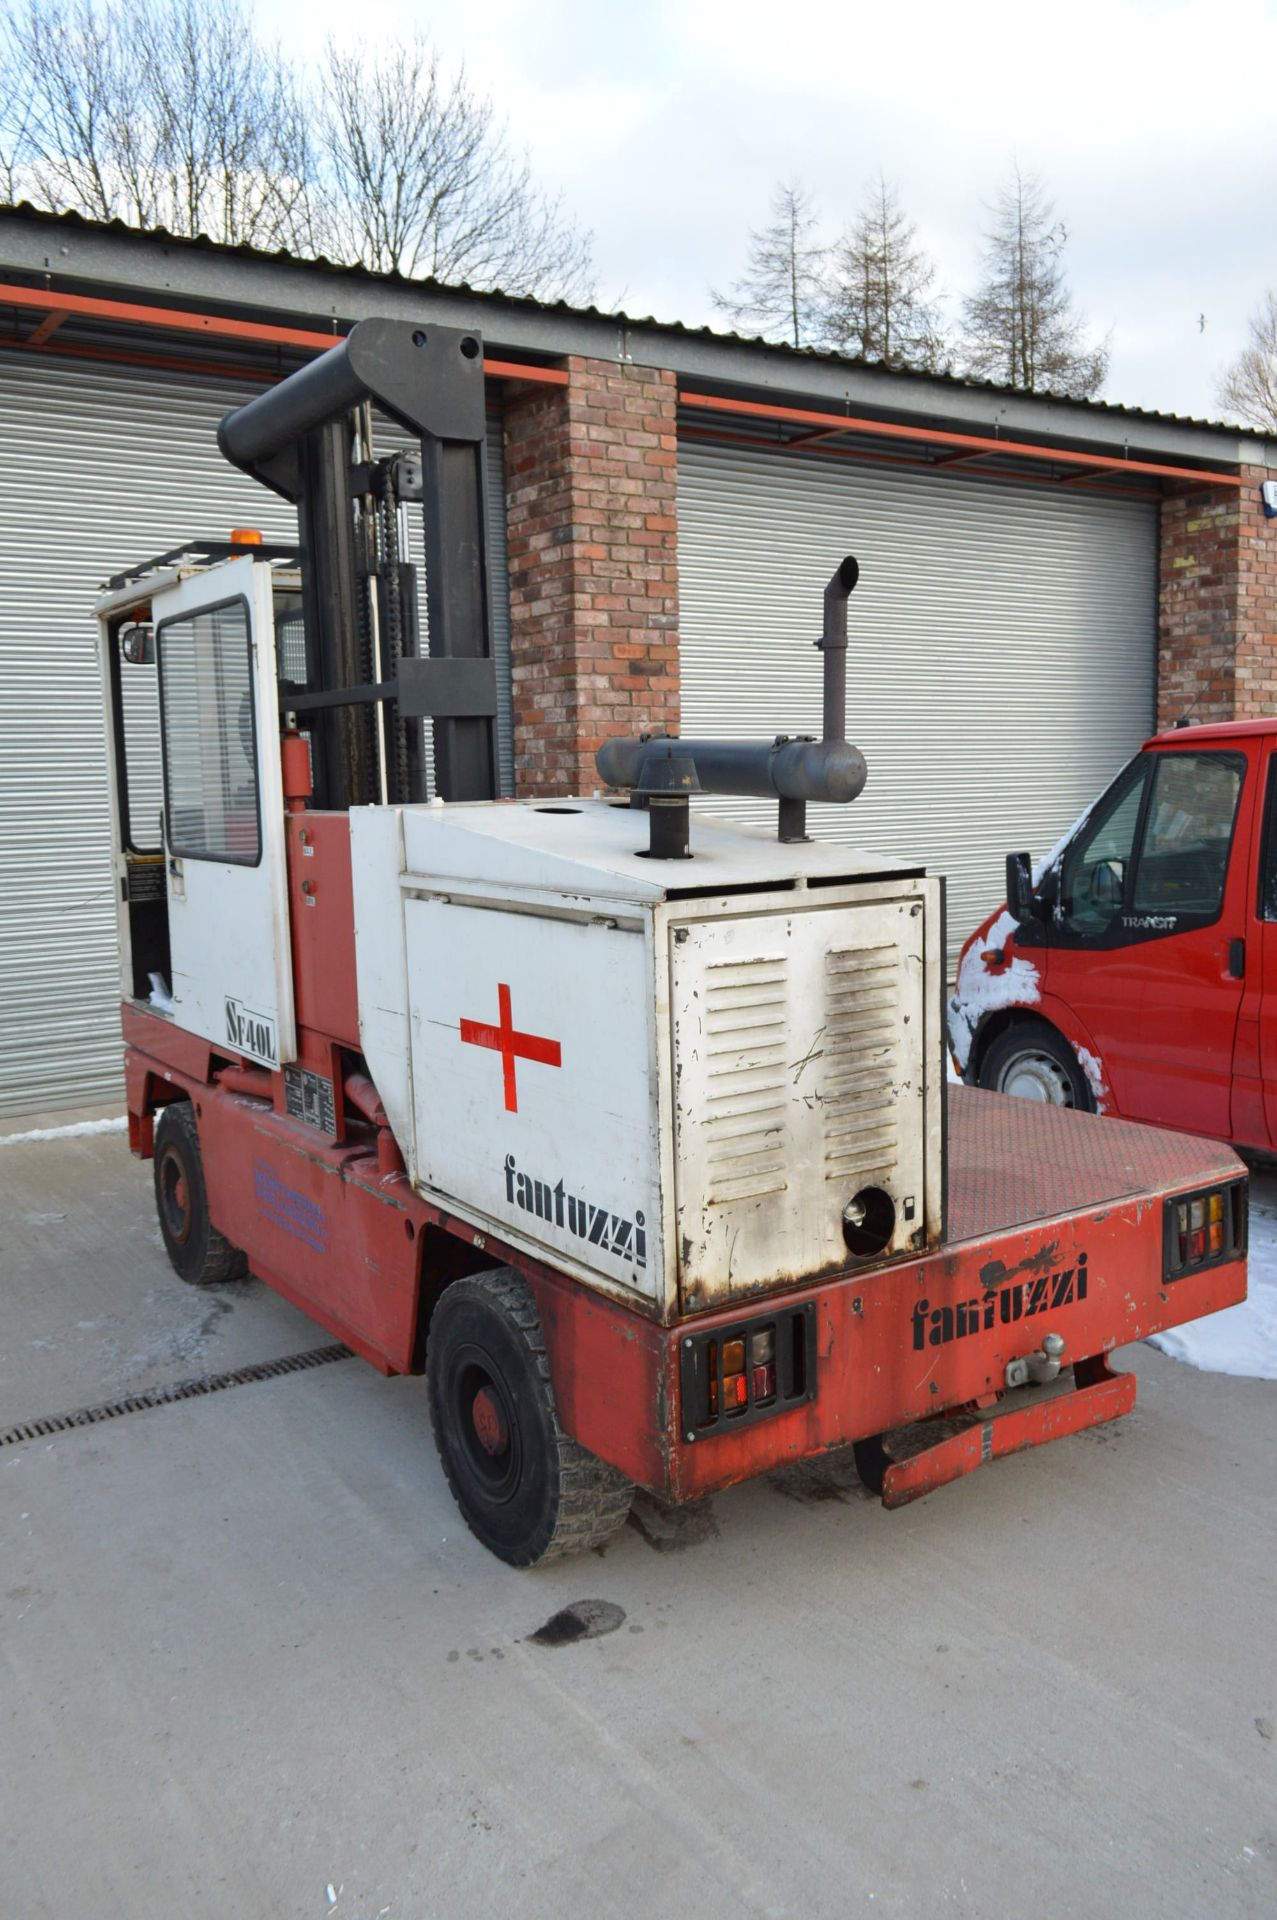 Fantuzzi SF40 40L SERIES 2000 4000kg CAPACITY SIDELOAD FORK LIFT, serial no. 42163, year of - Image 3 of 5